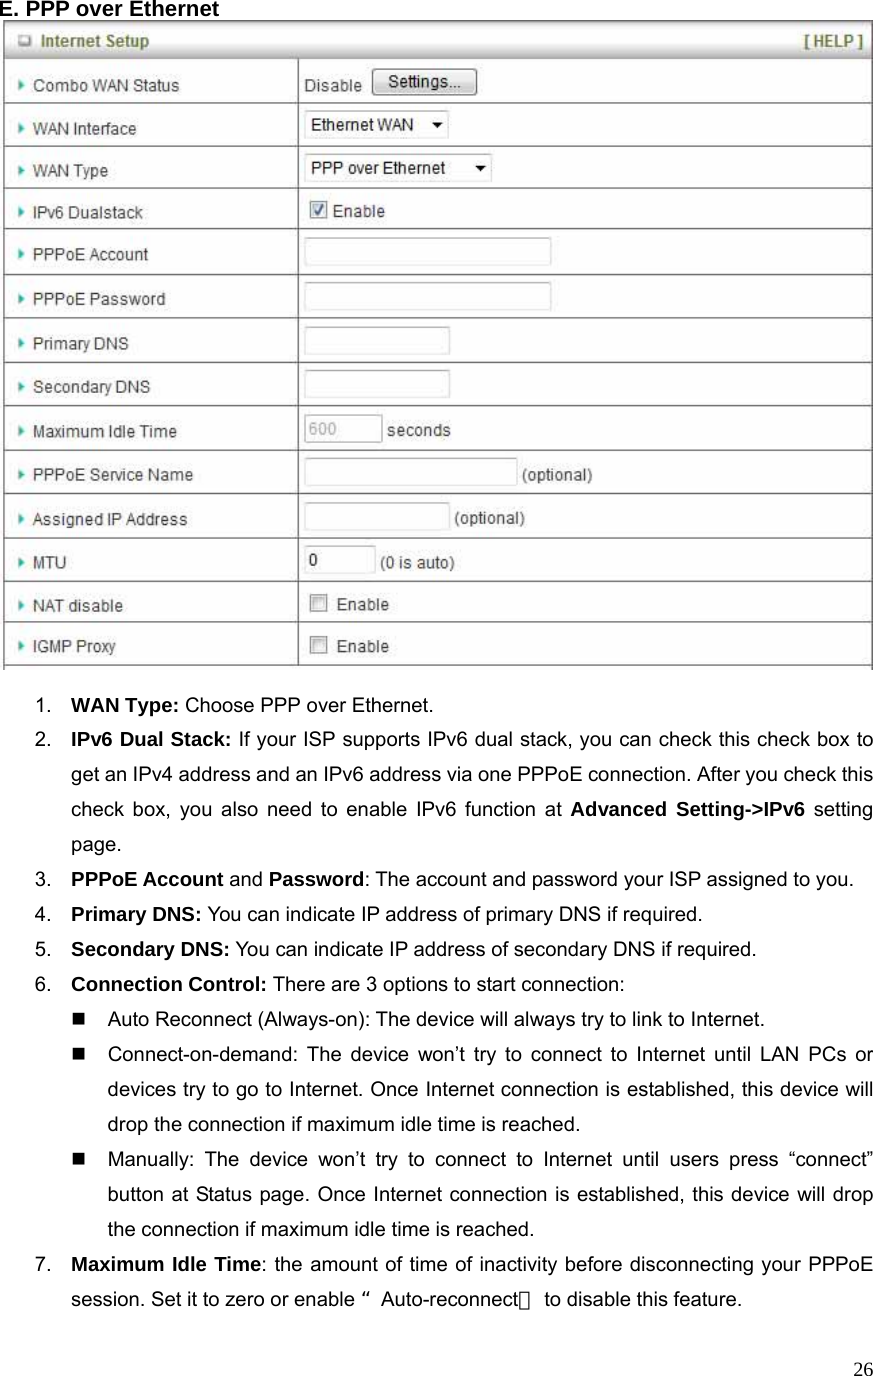  26E. PPP over Ethernet   1.  WAN Type: Choose PPP over Ethernet. 2.  IPv6 Dual Stack: If your ISP supports IPv6 dual stack, you can check this check box to get an IPv4 address and an IPv6 address via one PPPoE connection. After you check this check box, you also need to enable IPv6 function at Advanced Setting-&gt;IPv6 setting page. 3.  PPPoE Account and Password: The account and password your ISP assigned to you.   4.  Primary DNS: You can indicate IP address of primary DNS if required. 5.  Secondary DNS: You can indicate IP address of secondary DNS if required. 6.  Connection Control: There are 3 options to start connection:     Auto Reconnect (Always-on): The device will always try to link to Internet.       Connect-on-demand: The device won’t try to connect to Internet until LAN PCs or devices try to go to Internet. Once Internet connection is established, this device will drop the connection if maximum idle time is reached.   Manually: The device won’t try to connect to Internet until users press “connect” button at Status page. Once Internet connection is established, this device will drop the connection if maximum idle time is reached. 7.  Maximum Idle Time: the amount of time of inactivity before disconnecting your PPPoE session. Set it to zero or enable “Auto-reconnect＂ to disable this feature.   